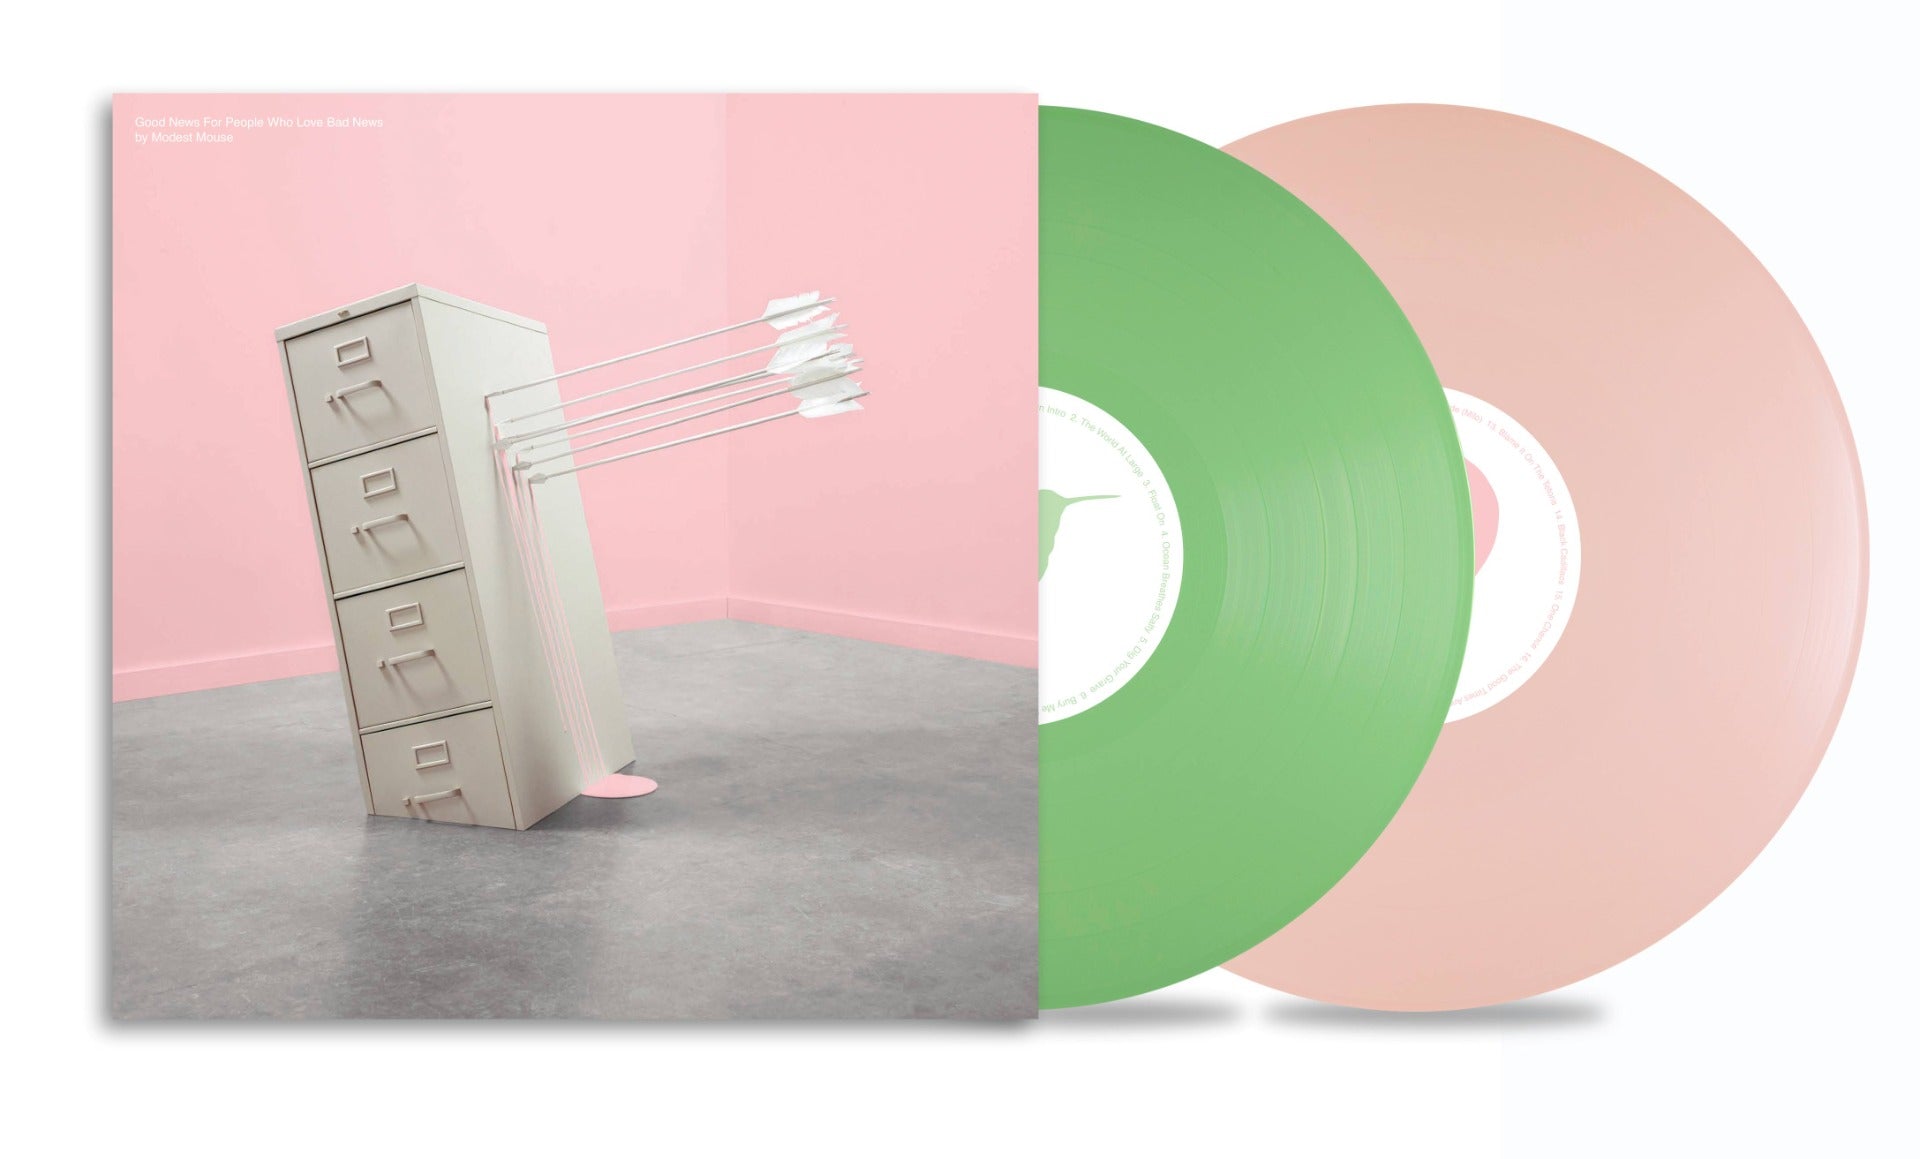 Modest Mouse | Good news For People Who Love Bad News (Deluxe Edition) (Colored Vinyl, Pink, Green) (2 Lp's) | Vinyl